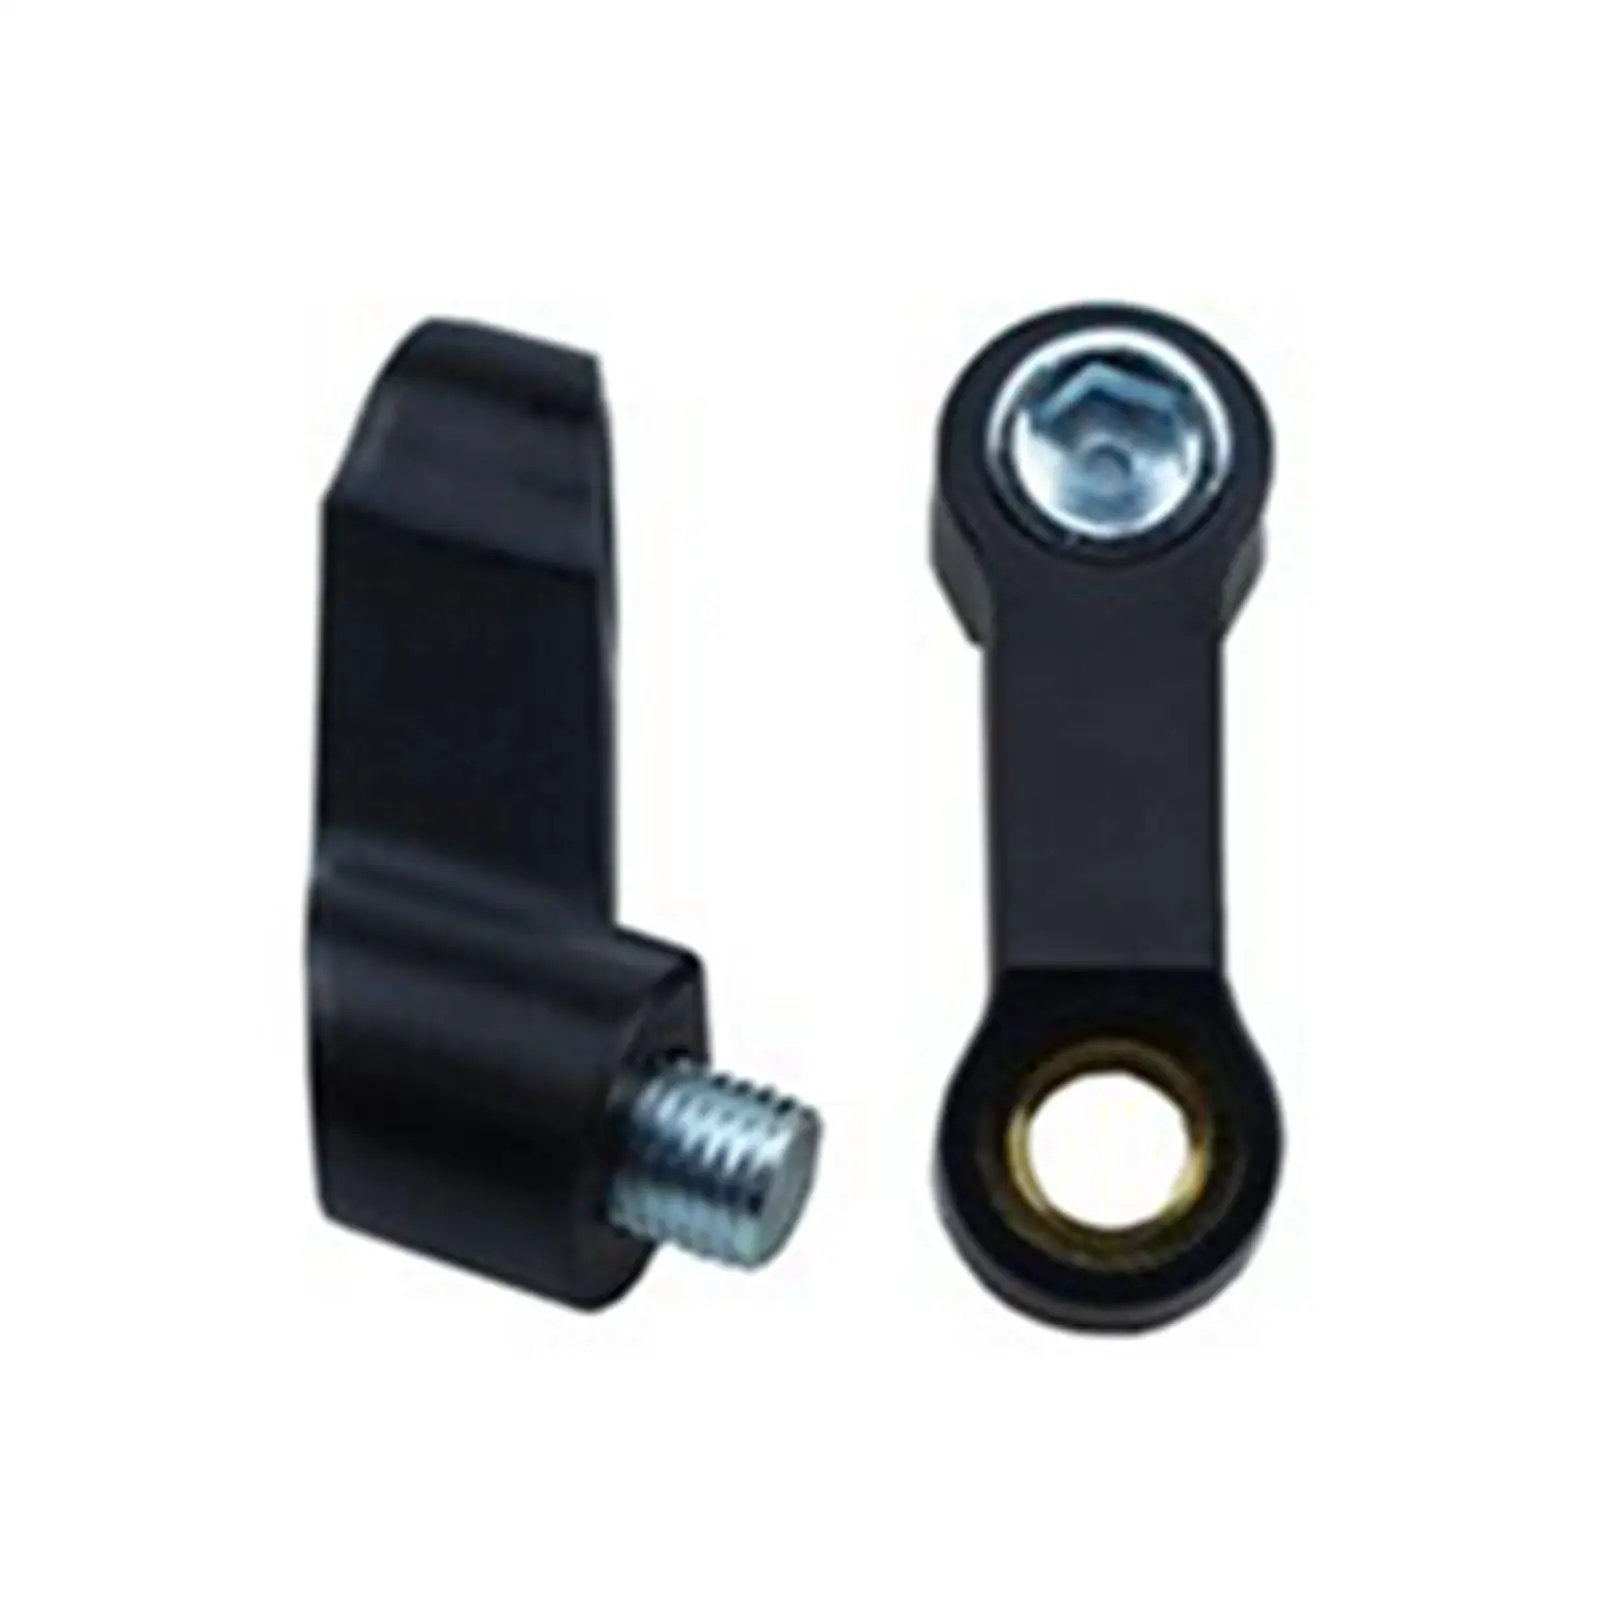 10mm Motorcycle Rear View  Riser Extender Adapter Bracket ,Black Advanced manufacturing technology